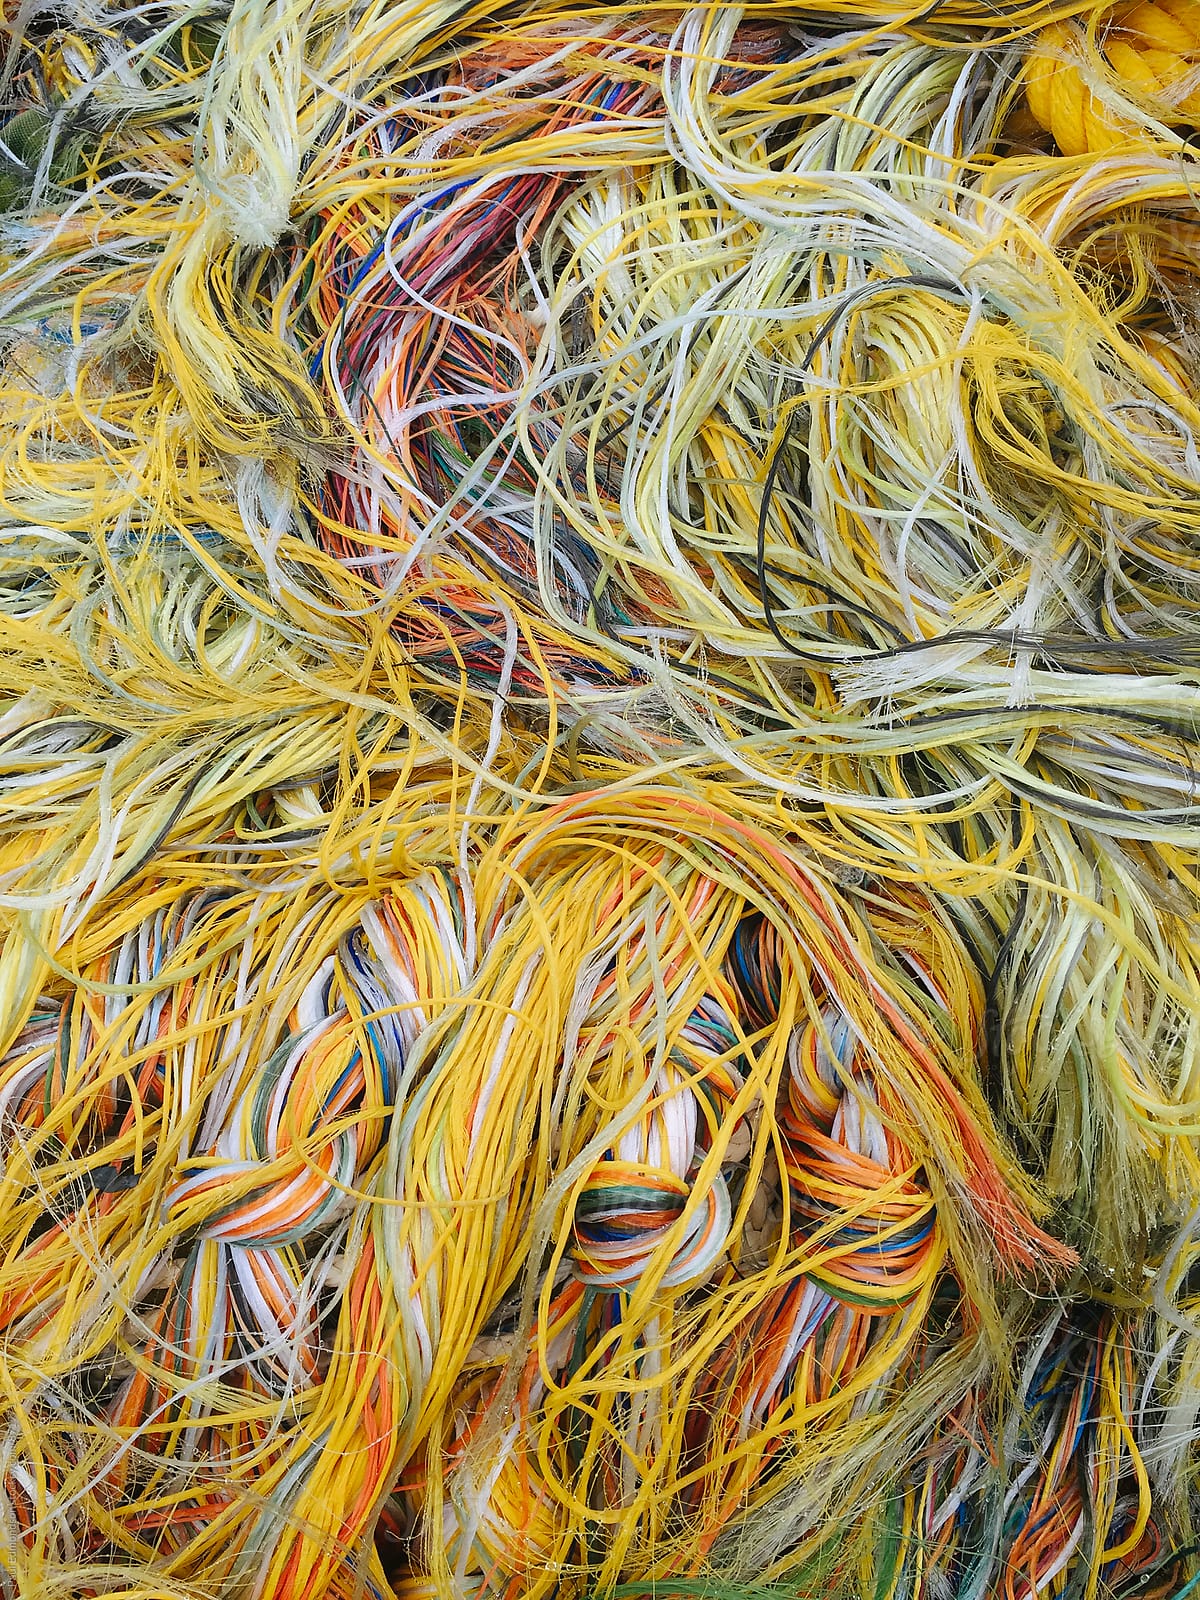 Close Up Of Pile Of Colorful Ropes And Commercial Fishing Nets by Stocksy  Contributor Rialto Images - Stocksy